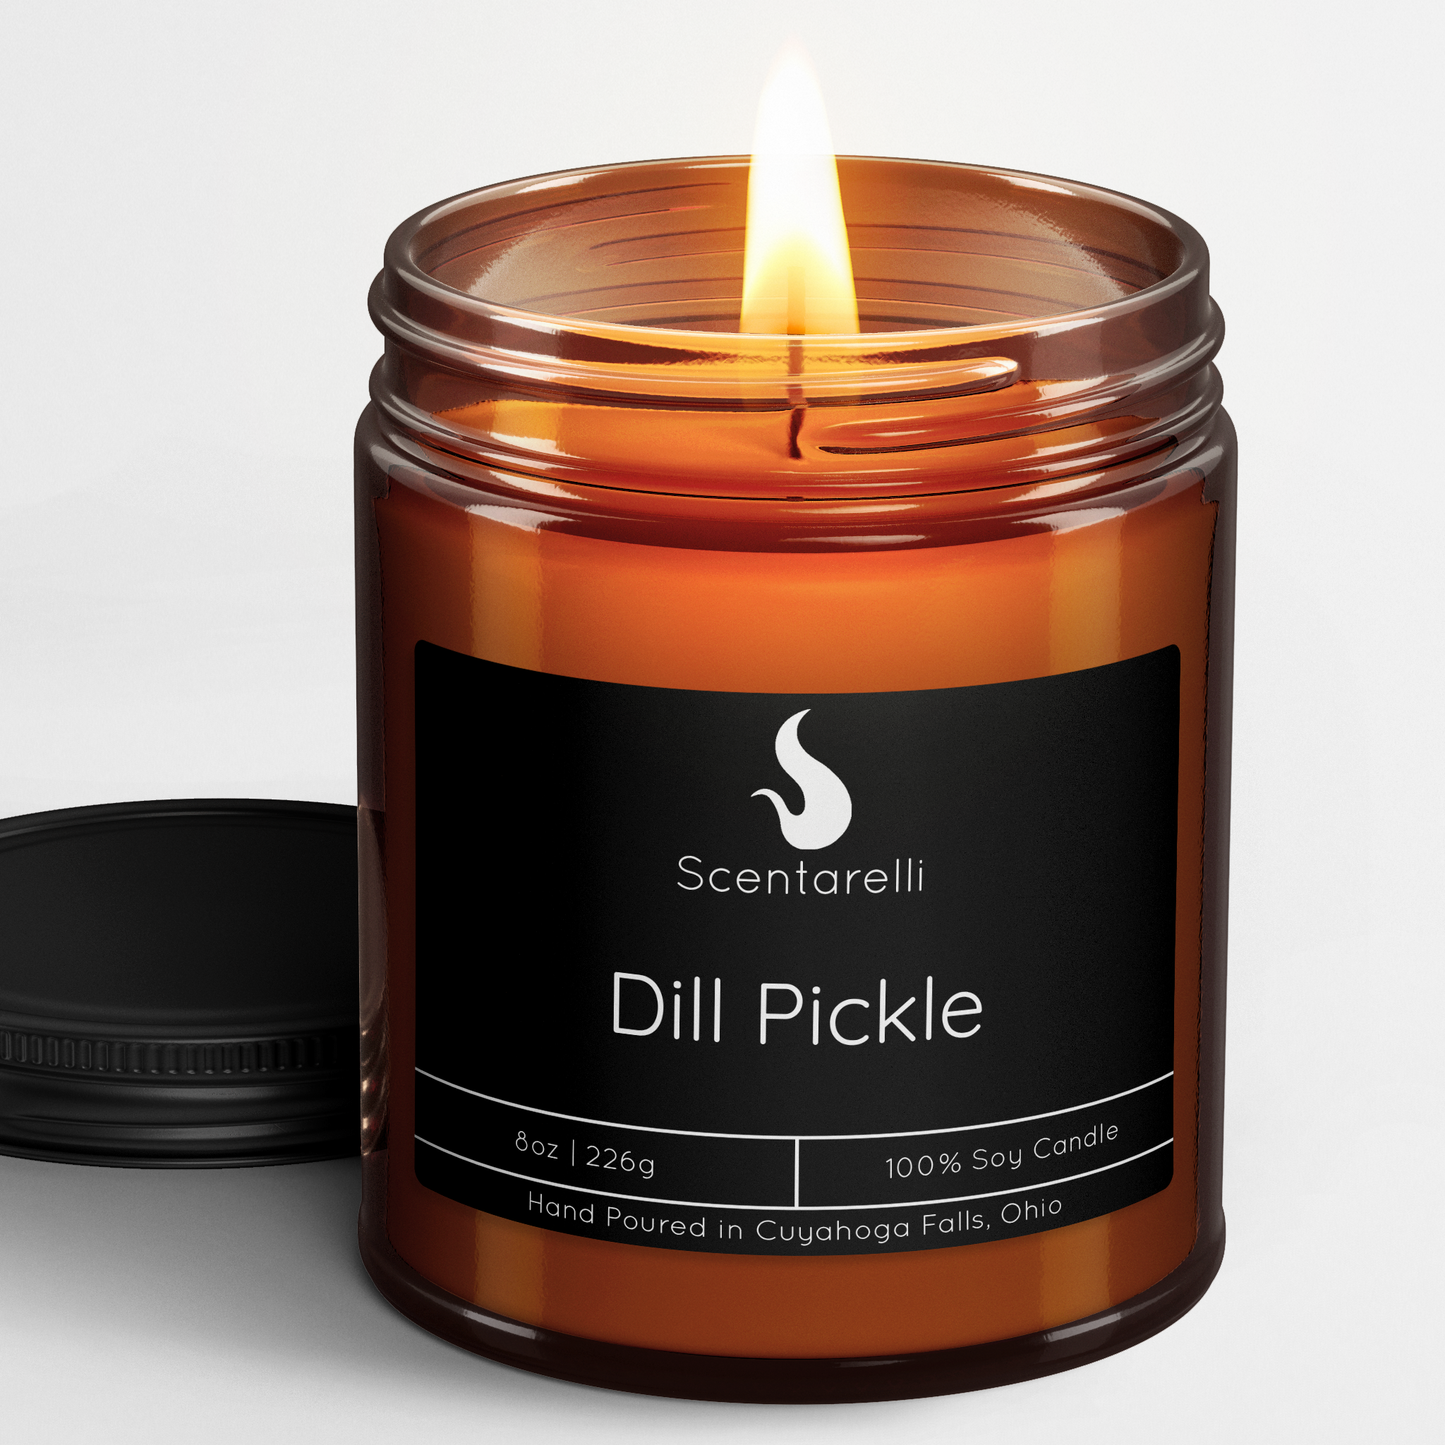 Dill Pickle Candle